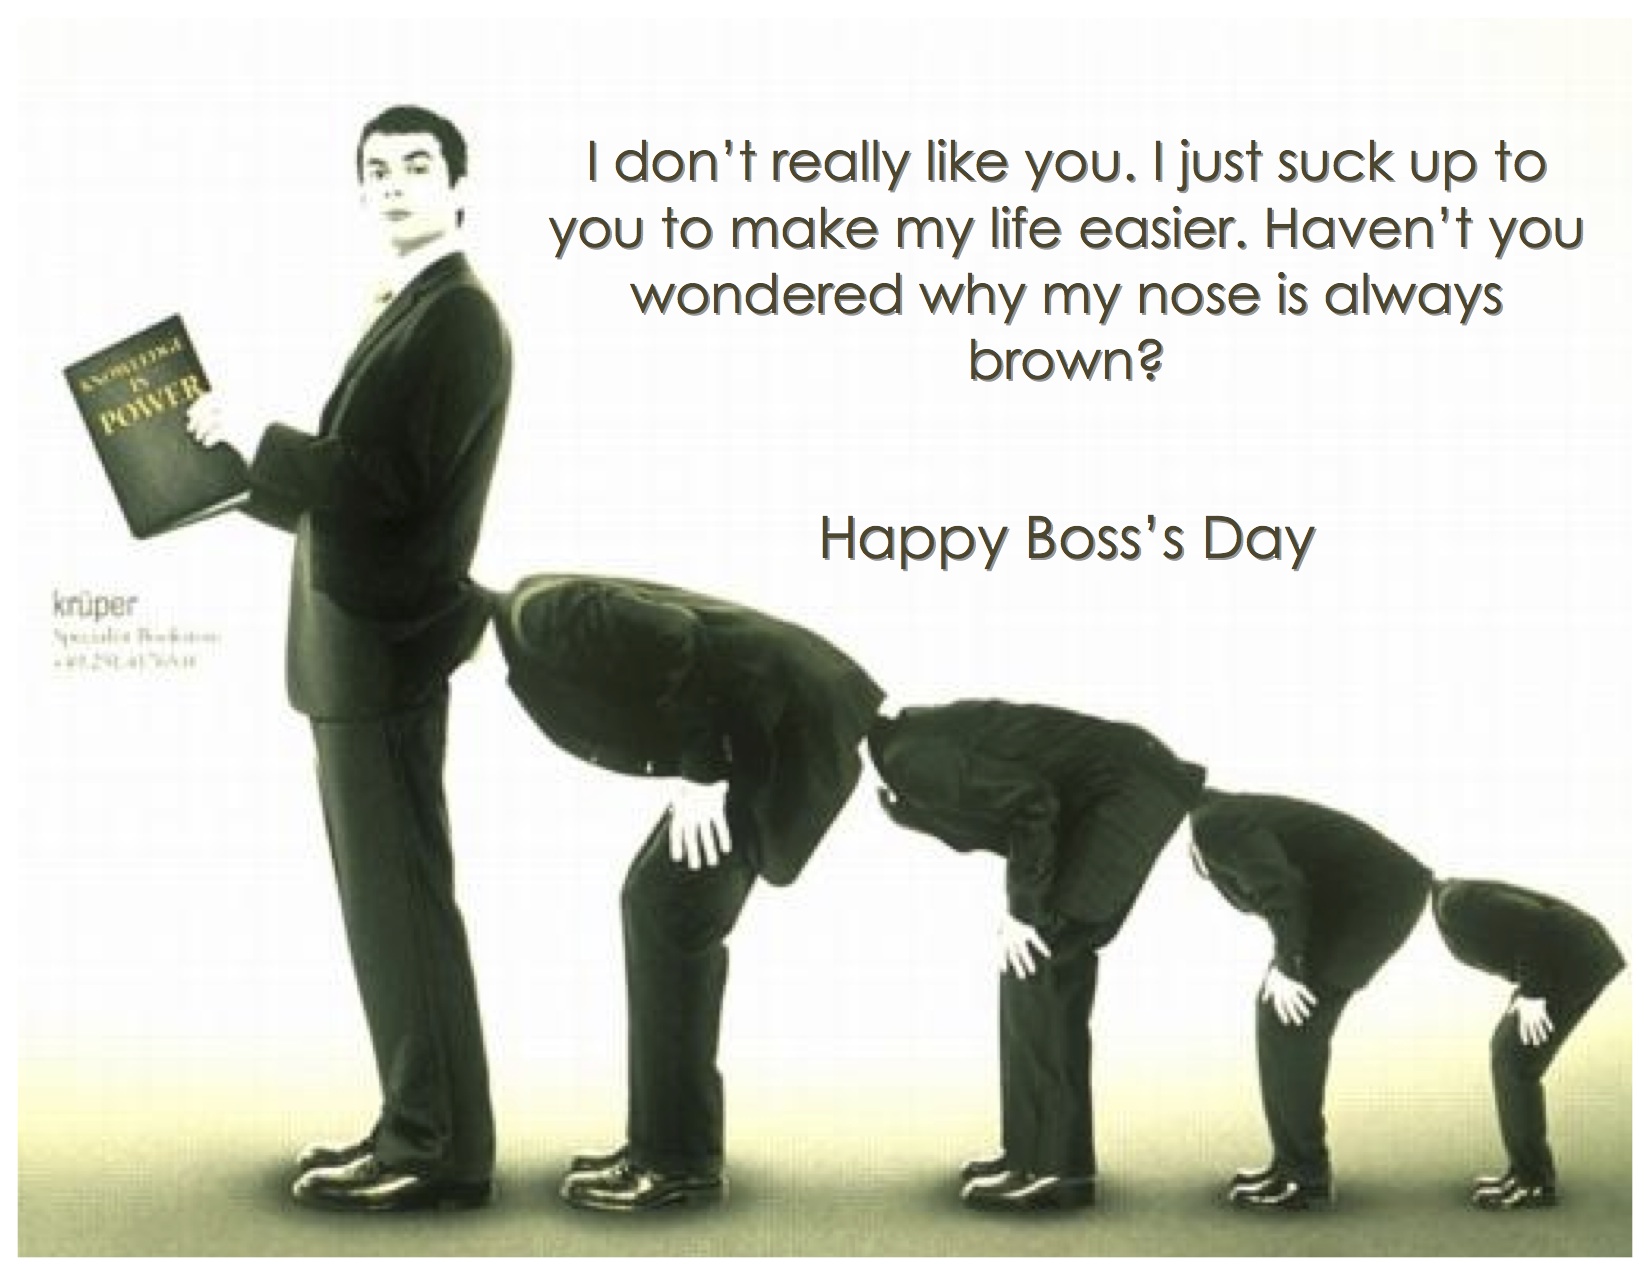 Five National Boss S Day Cards You Shouldn T Send   The Write